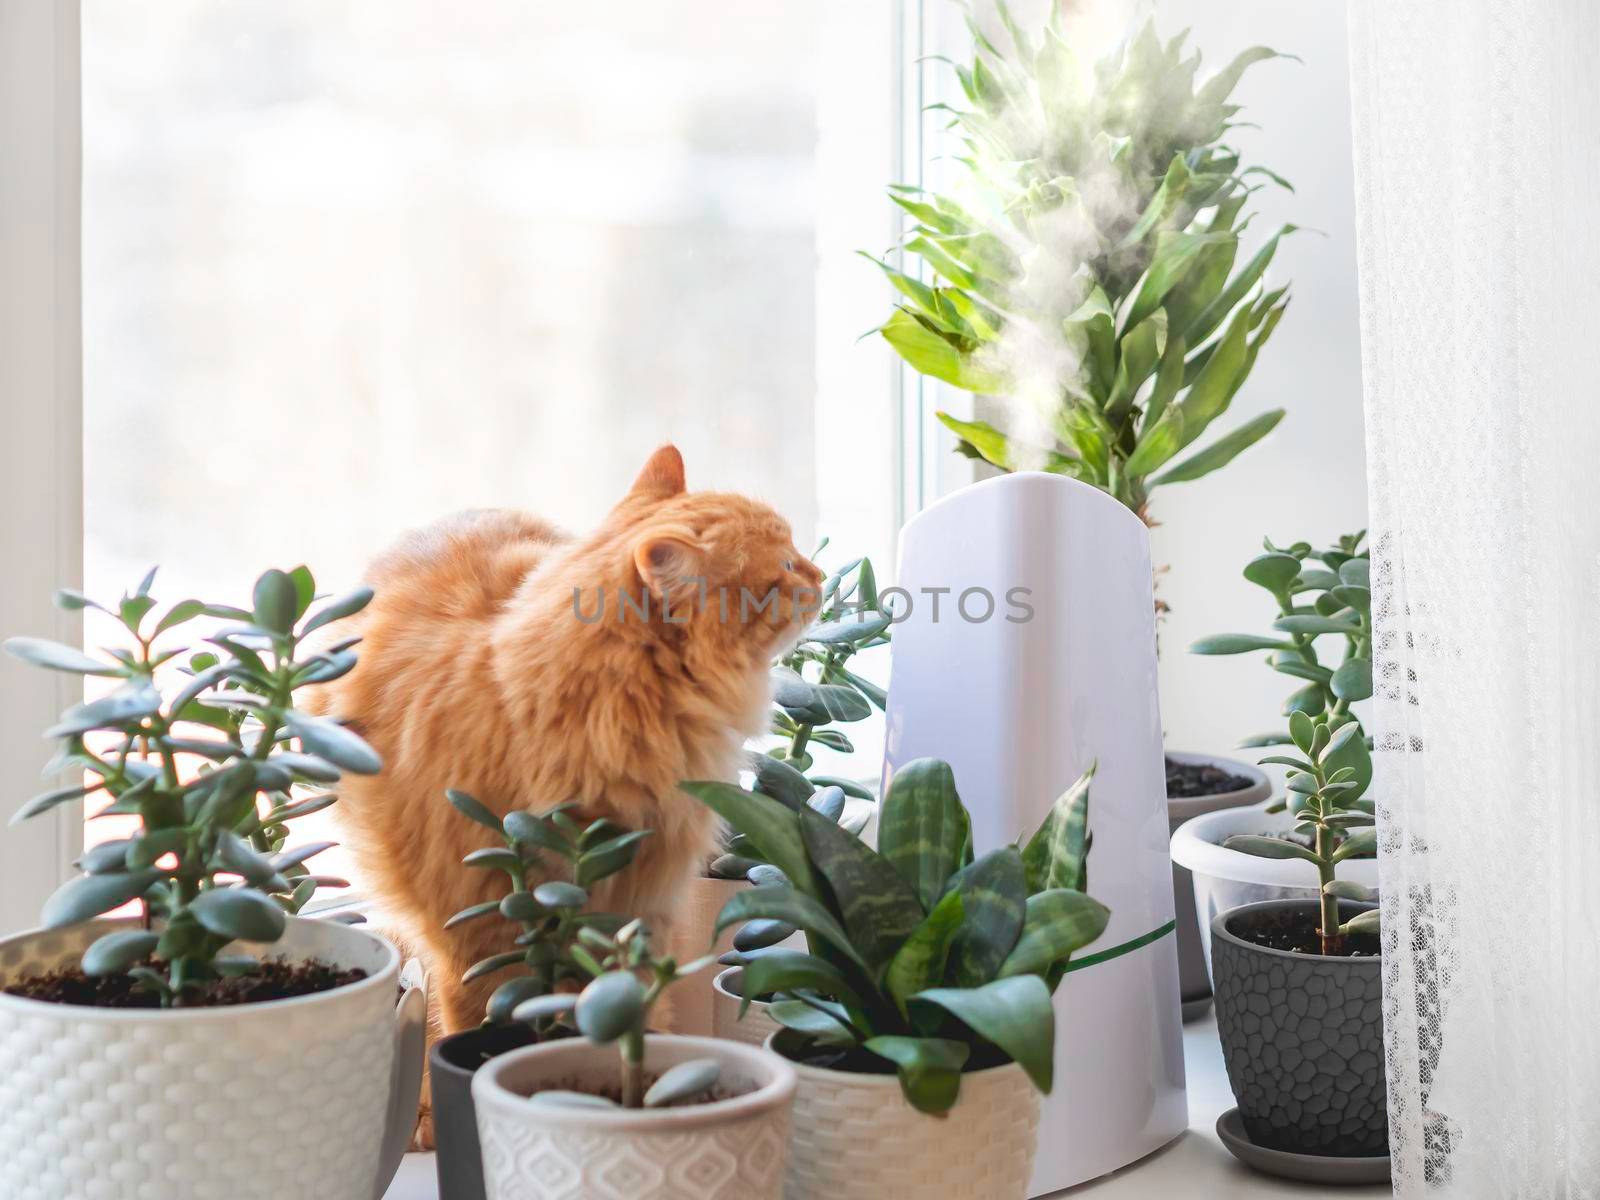 Ultrasonic humidifier among houseplants. Ginger cat among flower pots with succulent plants on windowsill. Water steam moisturizes dry air at home. Electric device for comfort atmosphere.